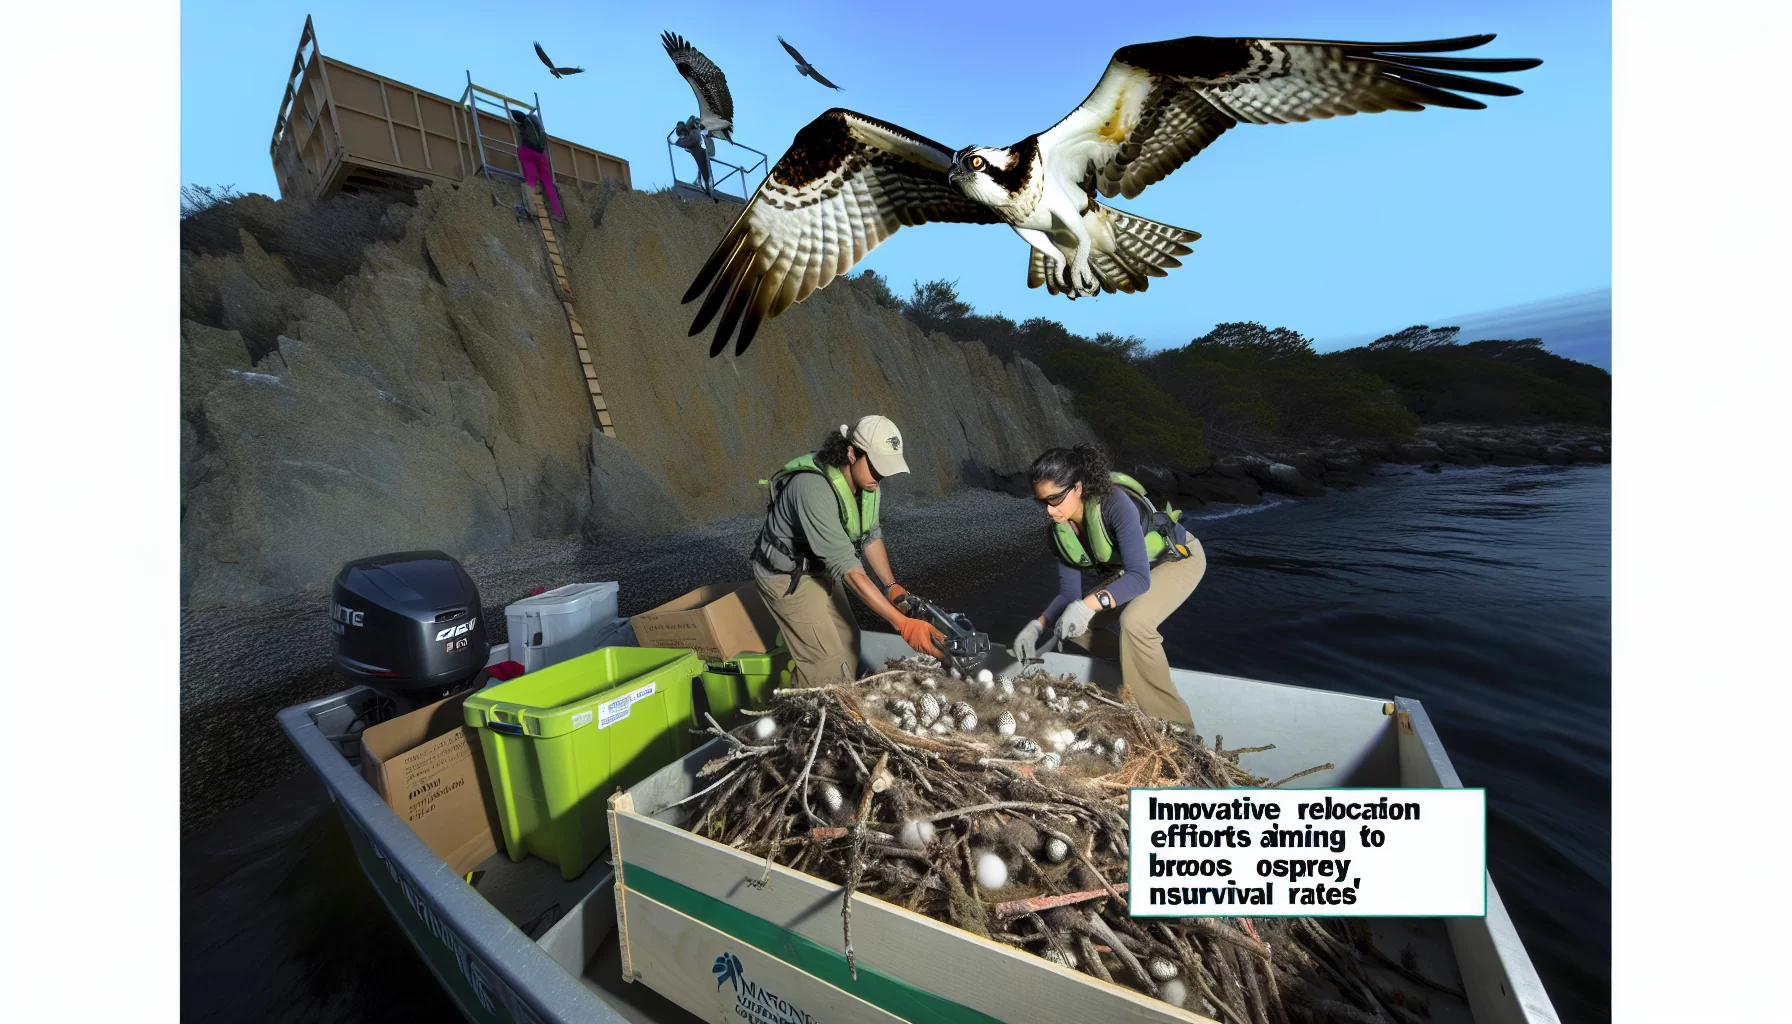 Innovative relocation efforts aiming to boost osprey survival rates